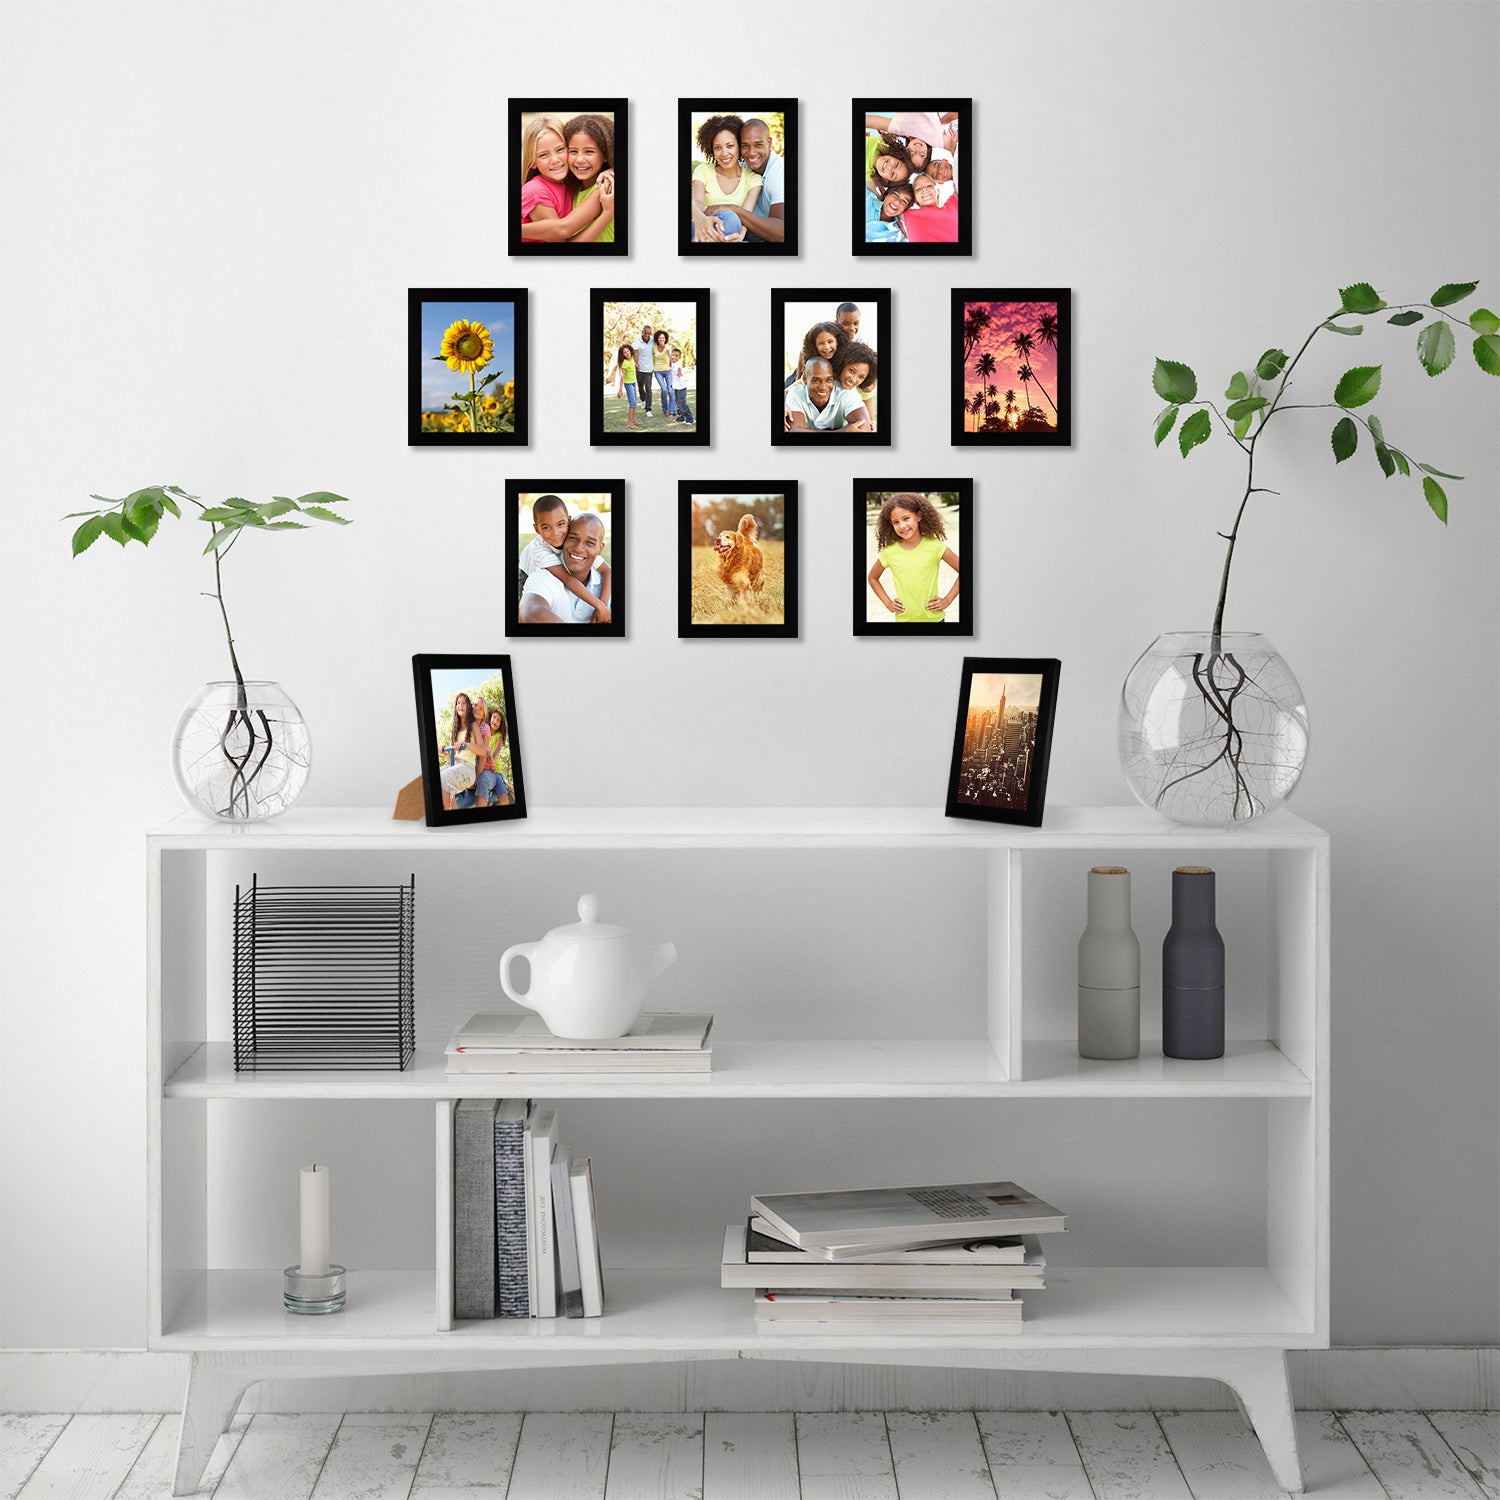 Americanflat 12-Pack Picture Frame with Polished Plexiglass, Black